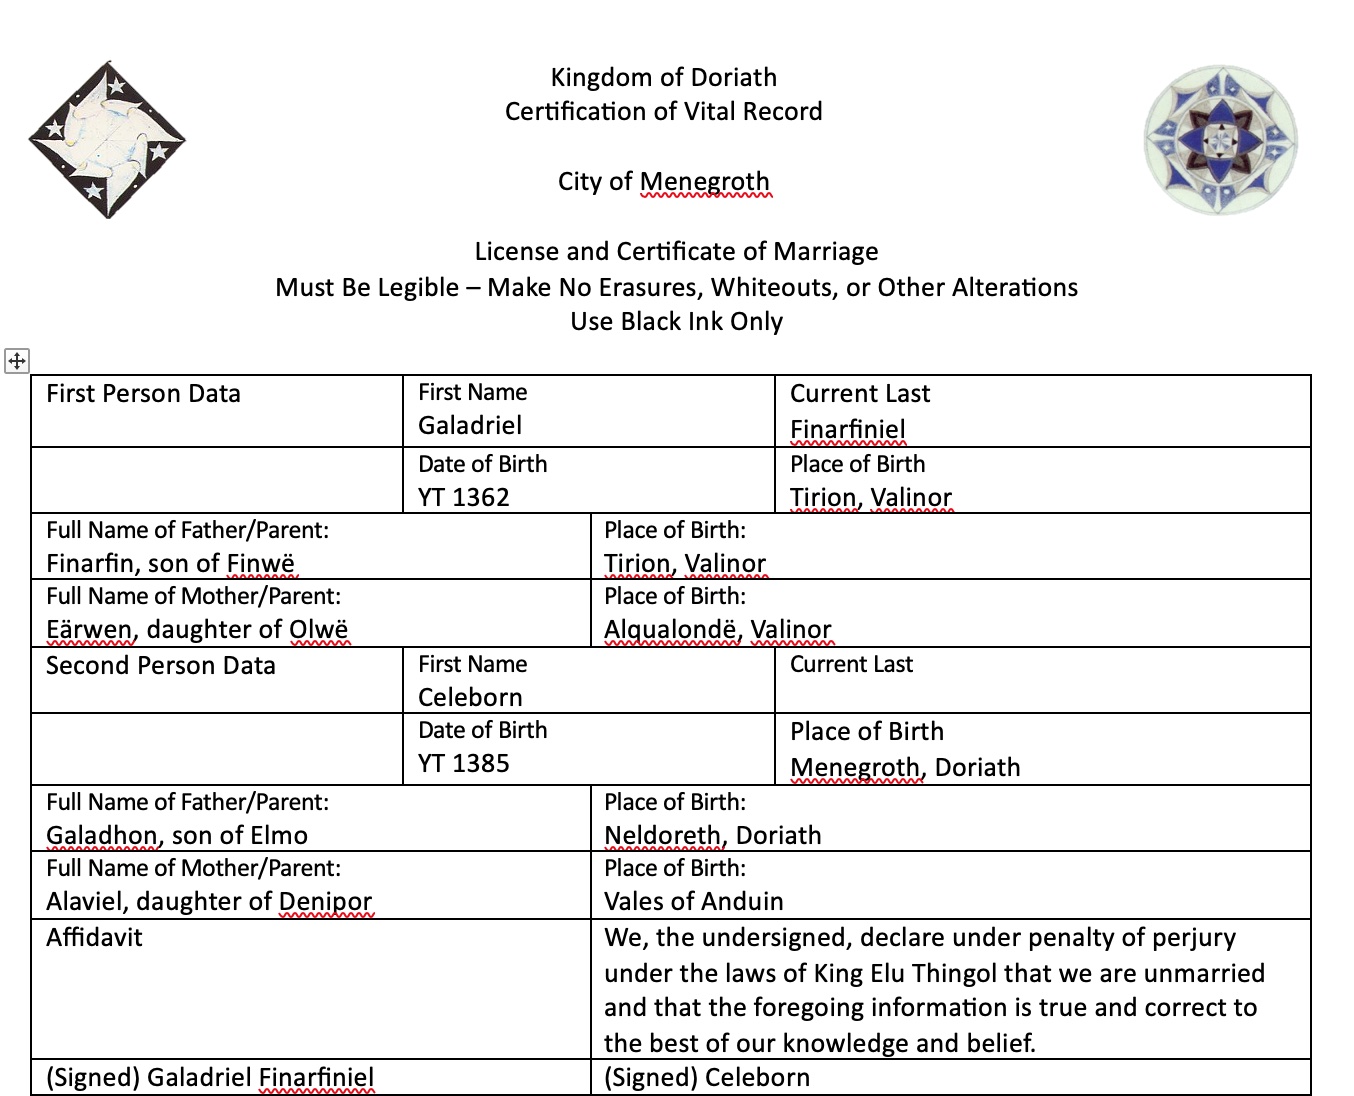 A modern-looking marriage certificate. Melian and Thingol's heraldic devices are on the top on the sides. The text says, "Kingdom of Doriath Certification of Vital Record   City of Menegroth  License and Certificate of Marriage Must Be Legible – Make No Erasures, Whiteouts, or Other Alterations Use Black Ink Only  First Person Data	First Name Galadriel	Current Last Finarfiniel 	Date of Birth YT 1362	Place of Birth Tirion, Valinor Full Name of Father/Parent: Finarfin, son of Finwë	Place of Birth: Tirion, Valinor Full Name of Mother/Parent:  Eärwen, daughter of Olwë	Place of Birth: Alqualondë, Valinor Second Person Data	First Name Celeborn	Current Last 	Date of Birth YT 1385	Place of Birth Menegroth, Doriath Full Name of Father/Parent: Galadhon, son of Elmo	Place of Birth: Neldoreth, Doriath Full Name of Mother/Parent:  Alaviel, daughter of Denipor	Place of Birth: Vales of Anduin Affidavit	We, the undersigned, declare under penalty of perjury under the laws of King Elu Thingol that we are unmarried and that the foregoing information is true and correct to the best of our knowledge and belief. (Signed) Galadriel Finarfiniel	(Signed) Celeborn."